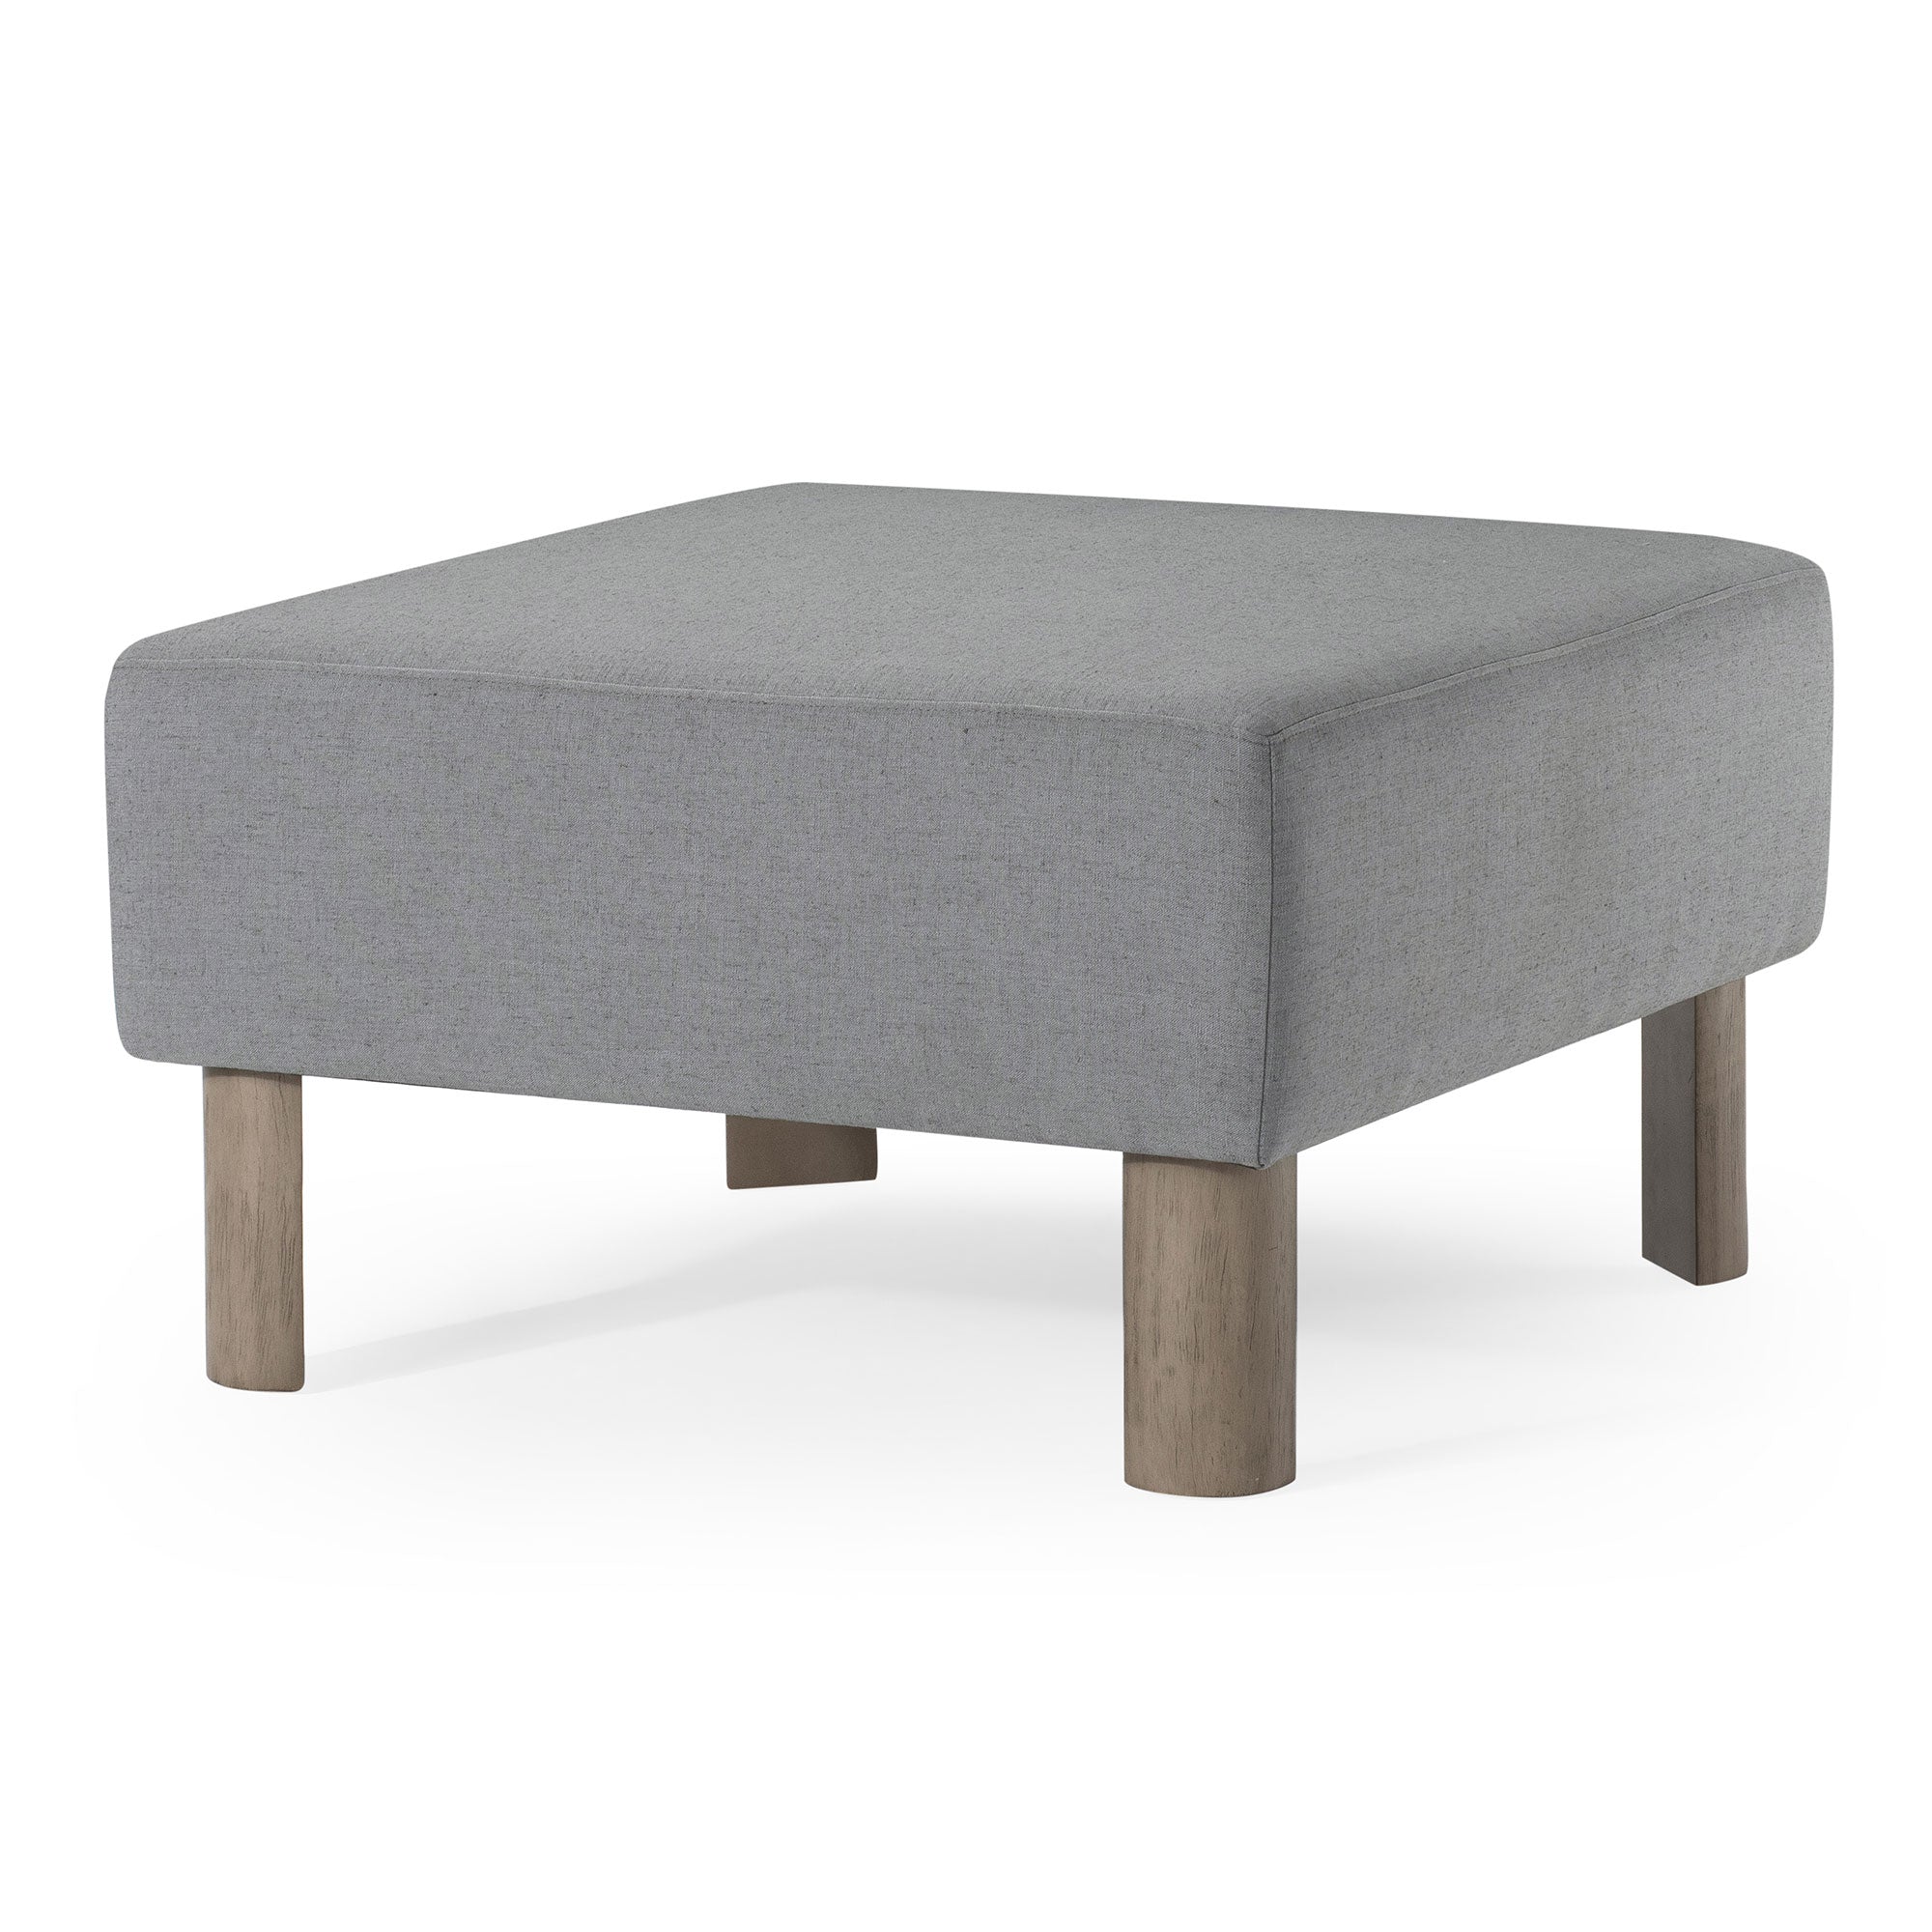 Maven-Lane-Lena-Contemporary-Upholstered-Ottoman-With-Refined-Grey-Wood-Finish-Ottomans-&-Poufs